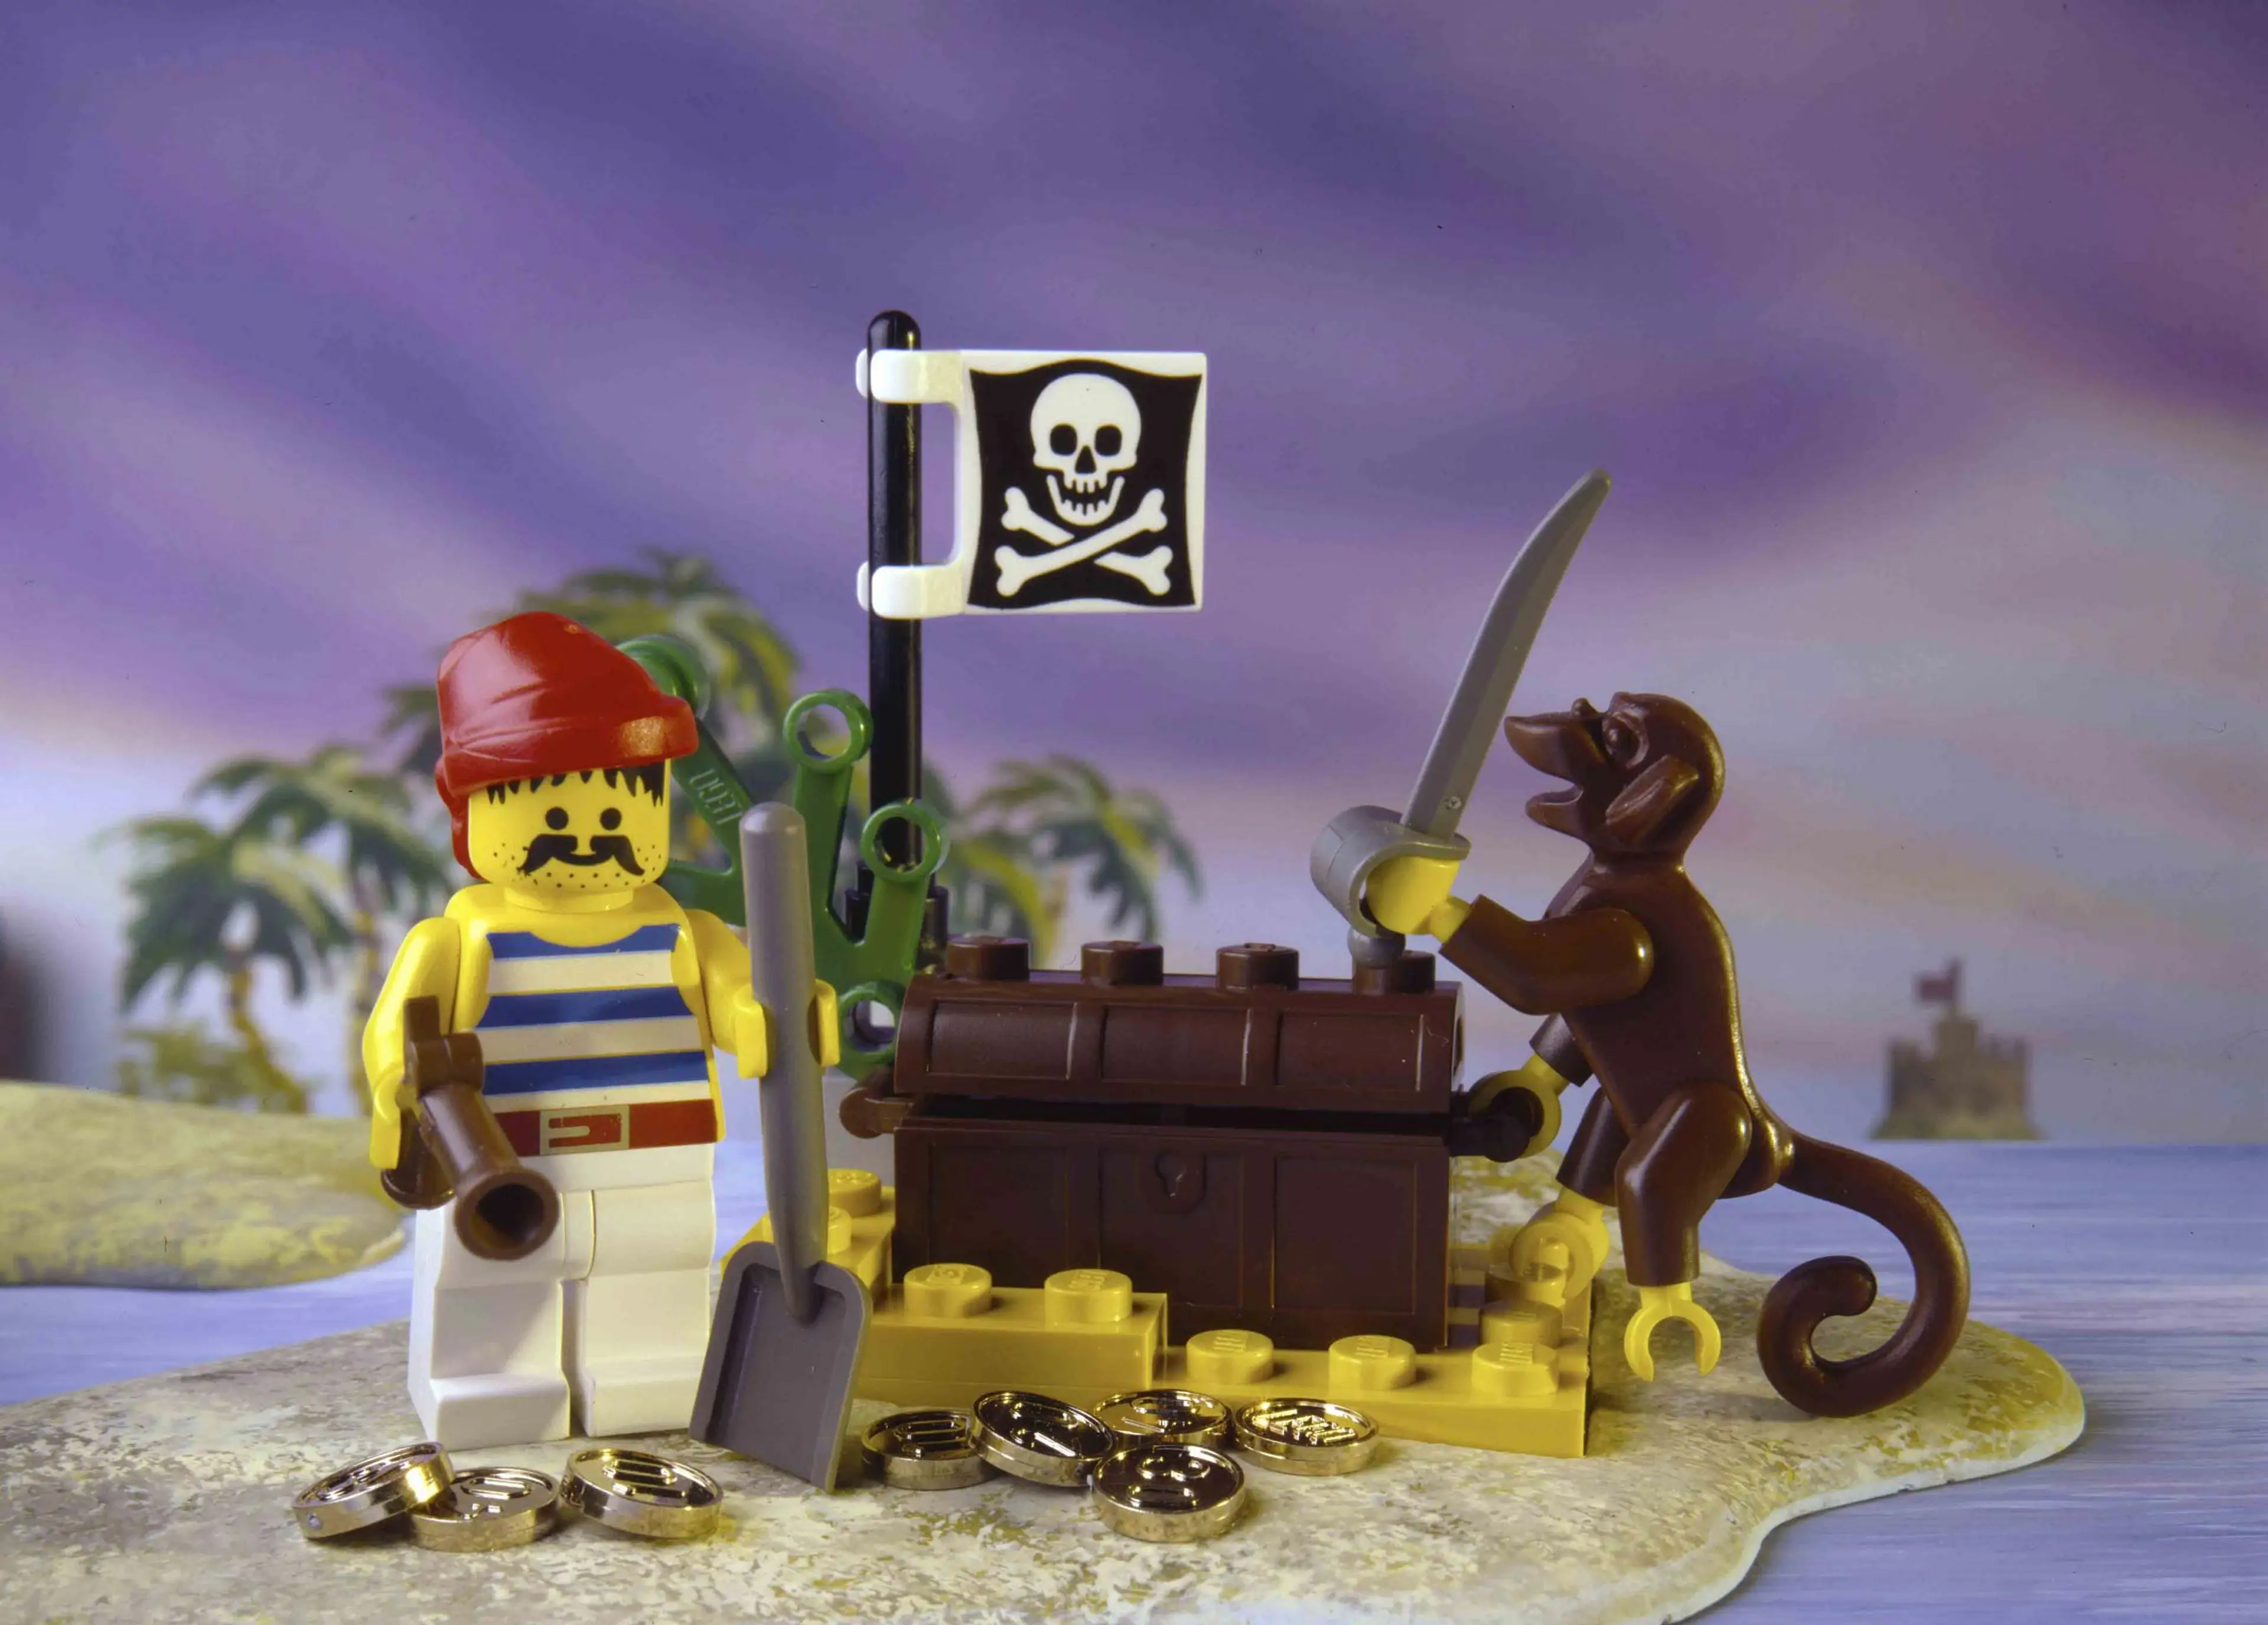 Pirates minifigure next to a chest and a monkey